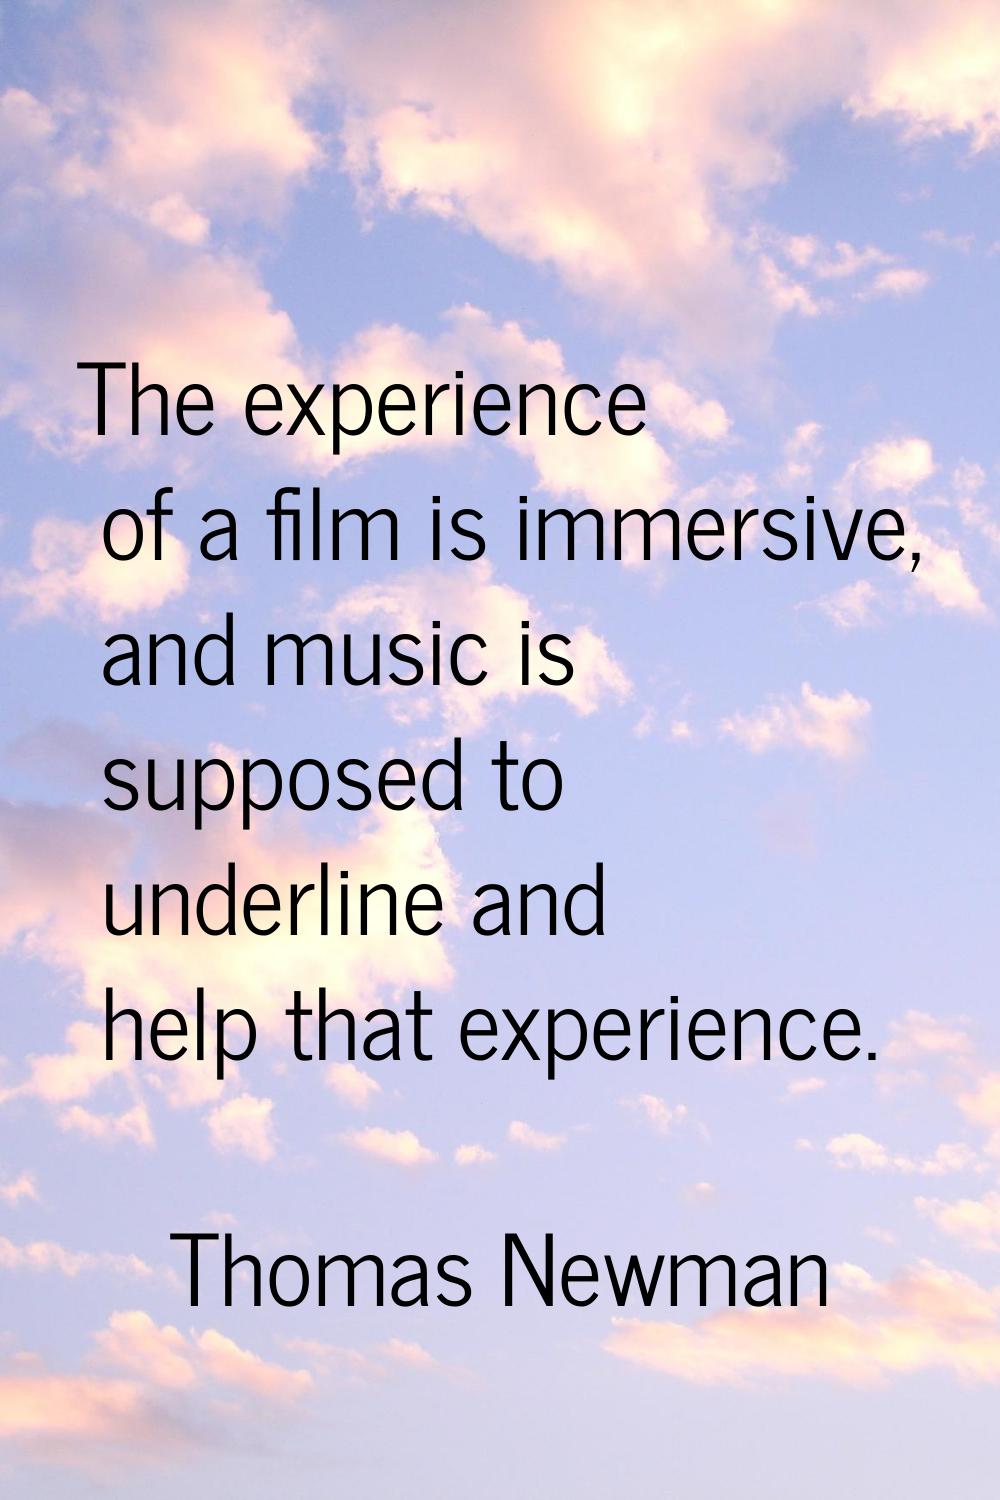 The experience of a film is immersive, and music is supposed to underline and help that experience.